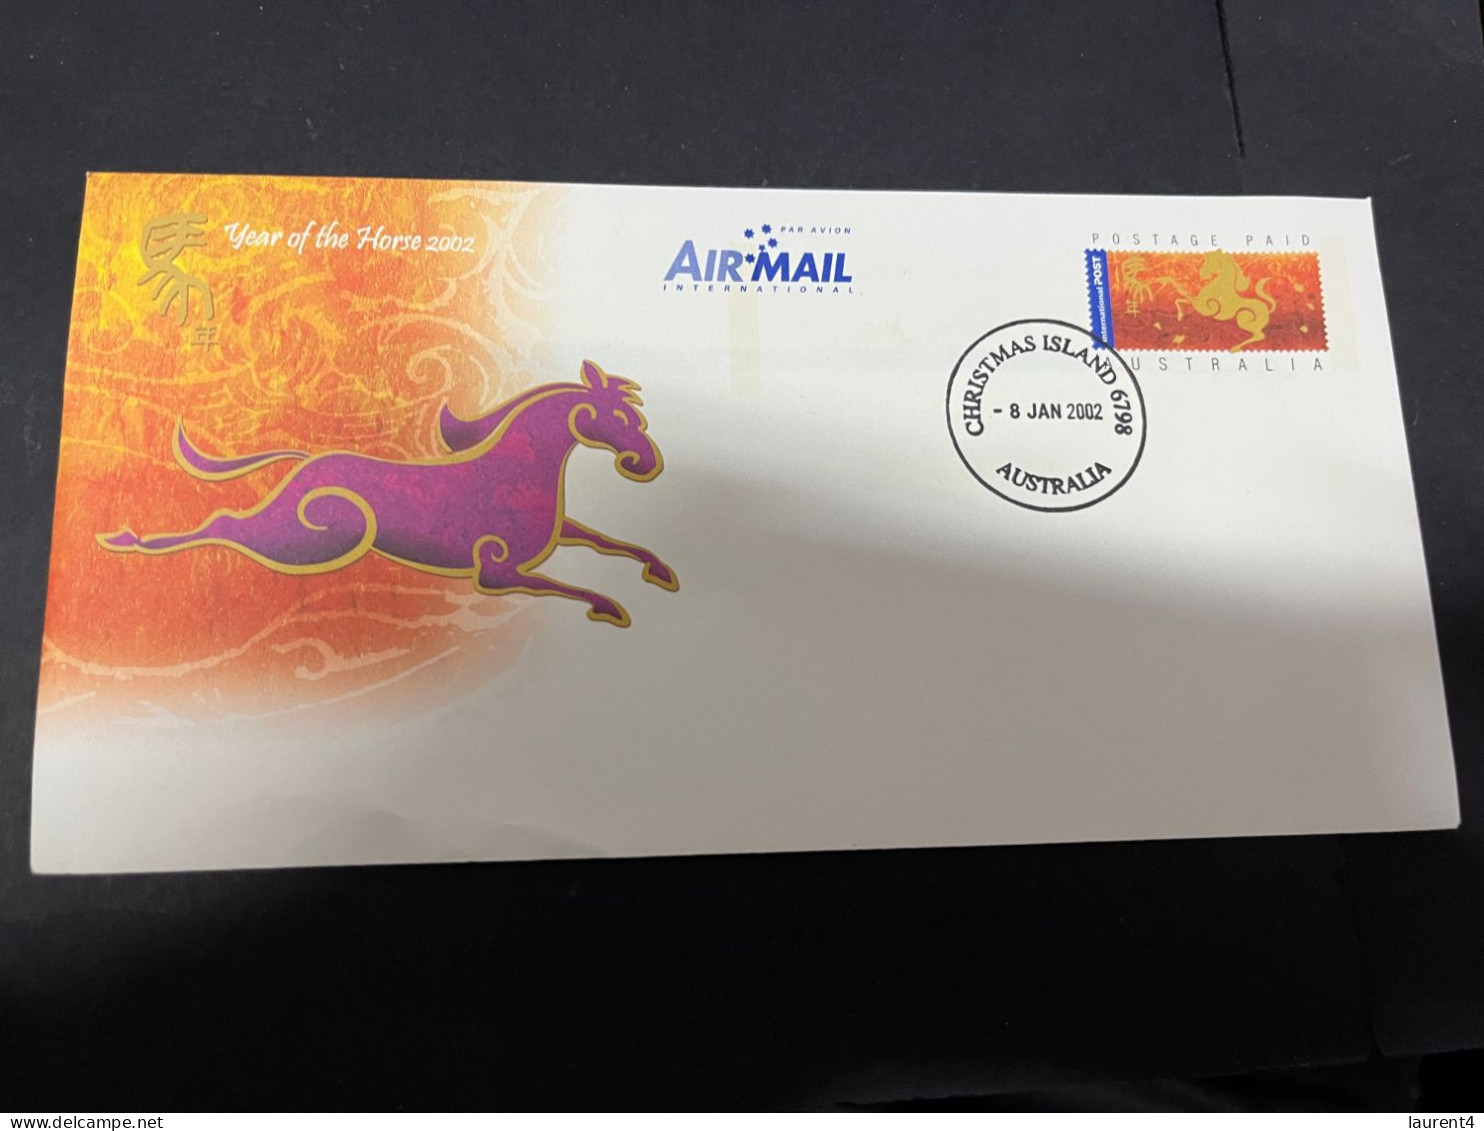 21-3-2024 (3 Y 39) Australia Christmas Island FDC - 2002 (2 Aerogramme Cover) Chinese New Year Of The Horse - Christmas Island